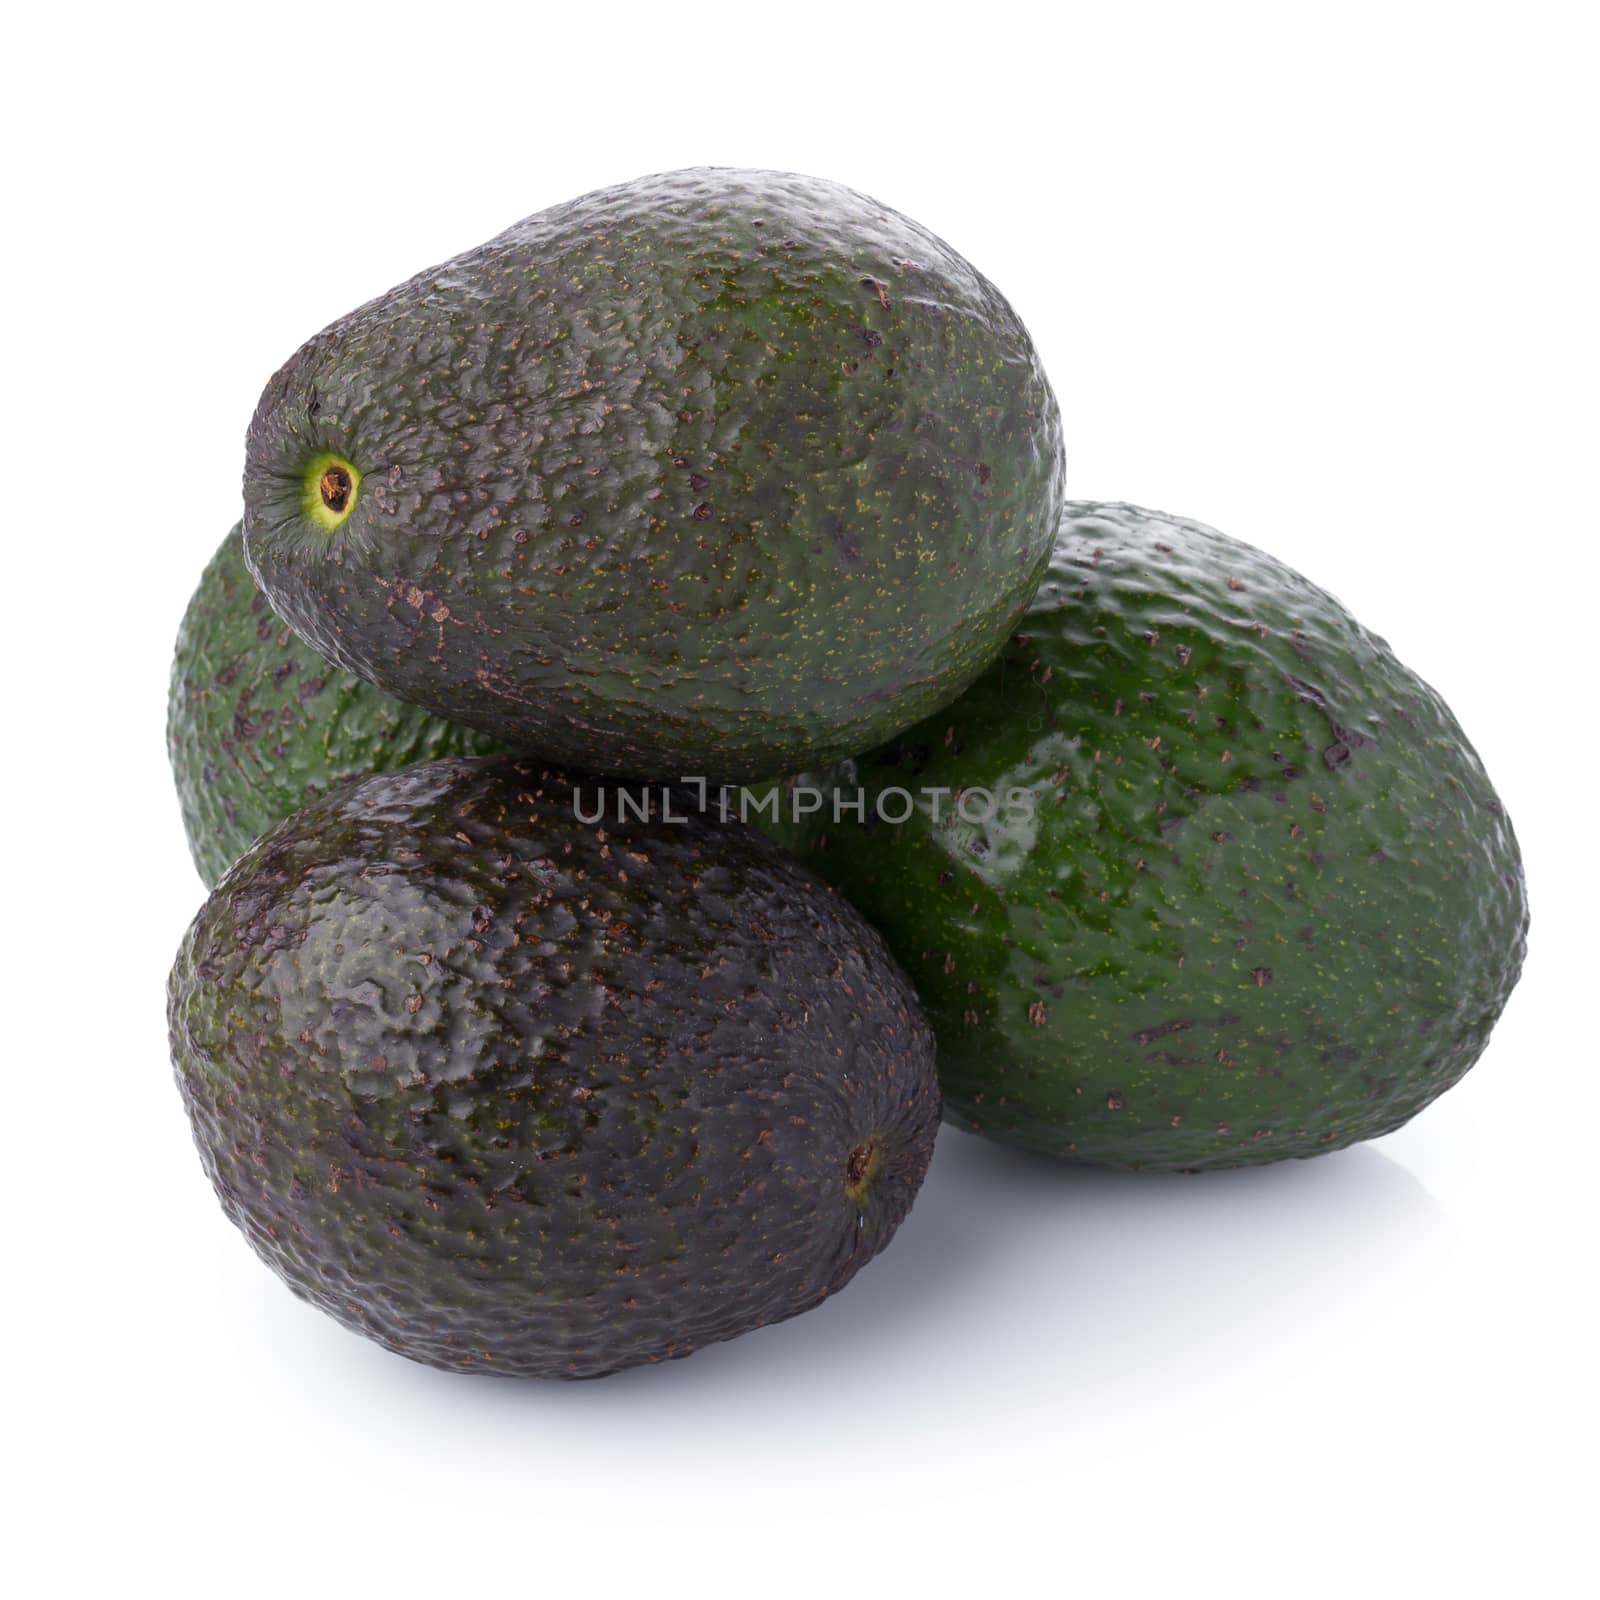 Green ripe avocado isolated on the white background.